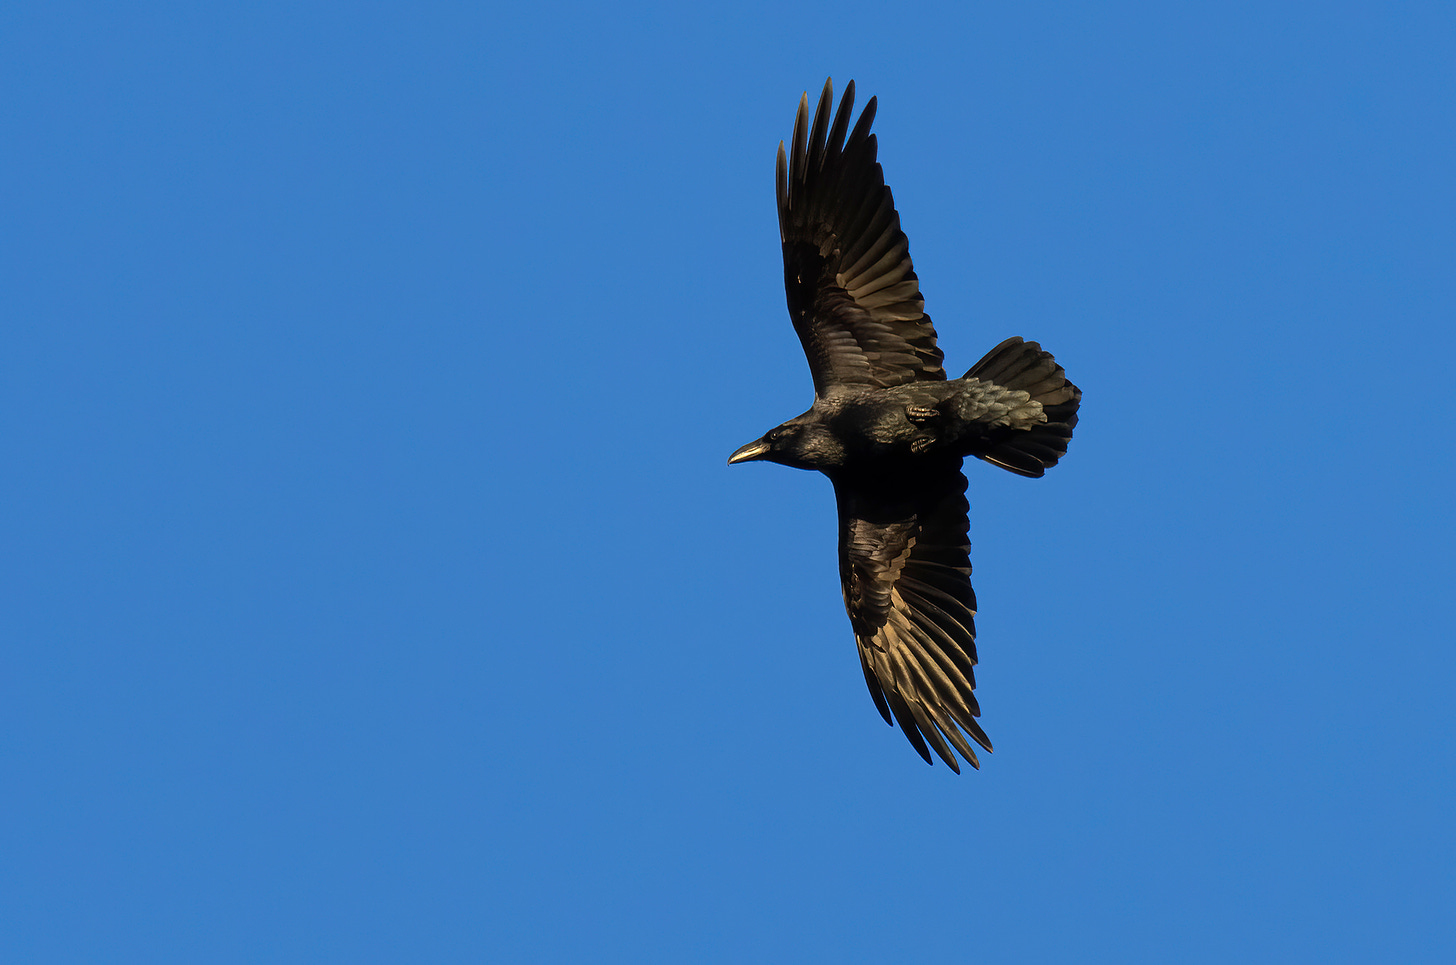 Photo of a raven in flight with a blue sky background